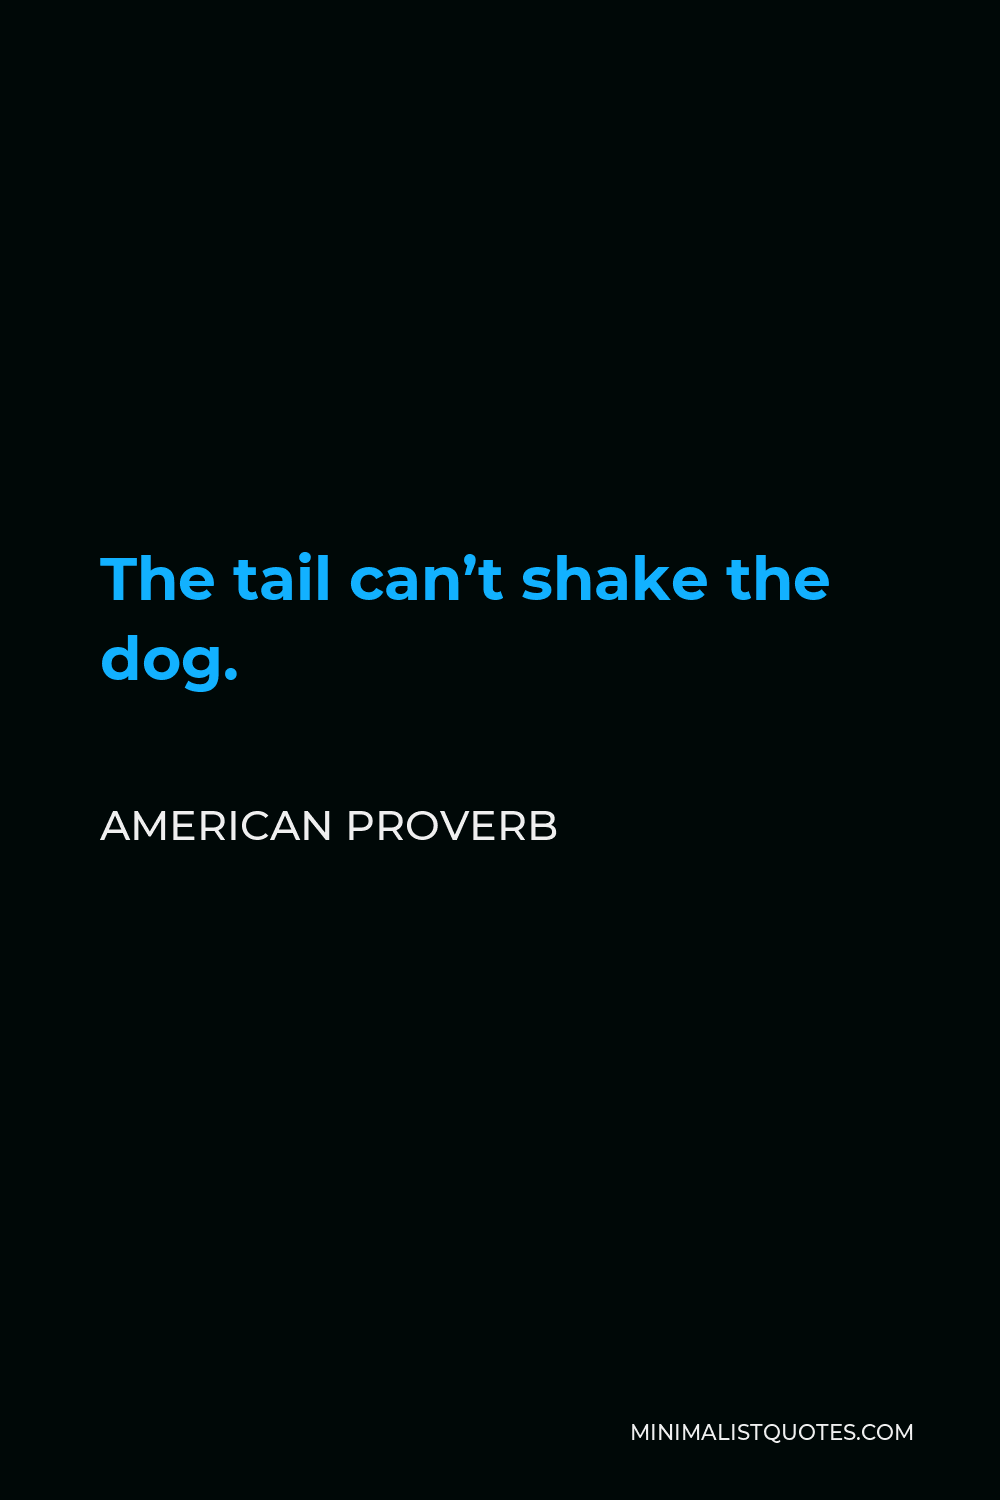 American Proverb Quote - The tail can’t shake the dog.